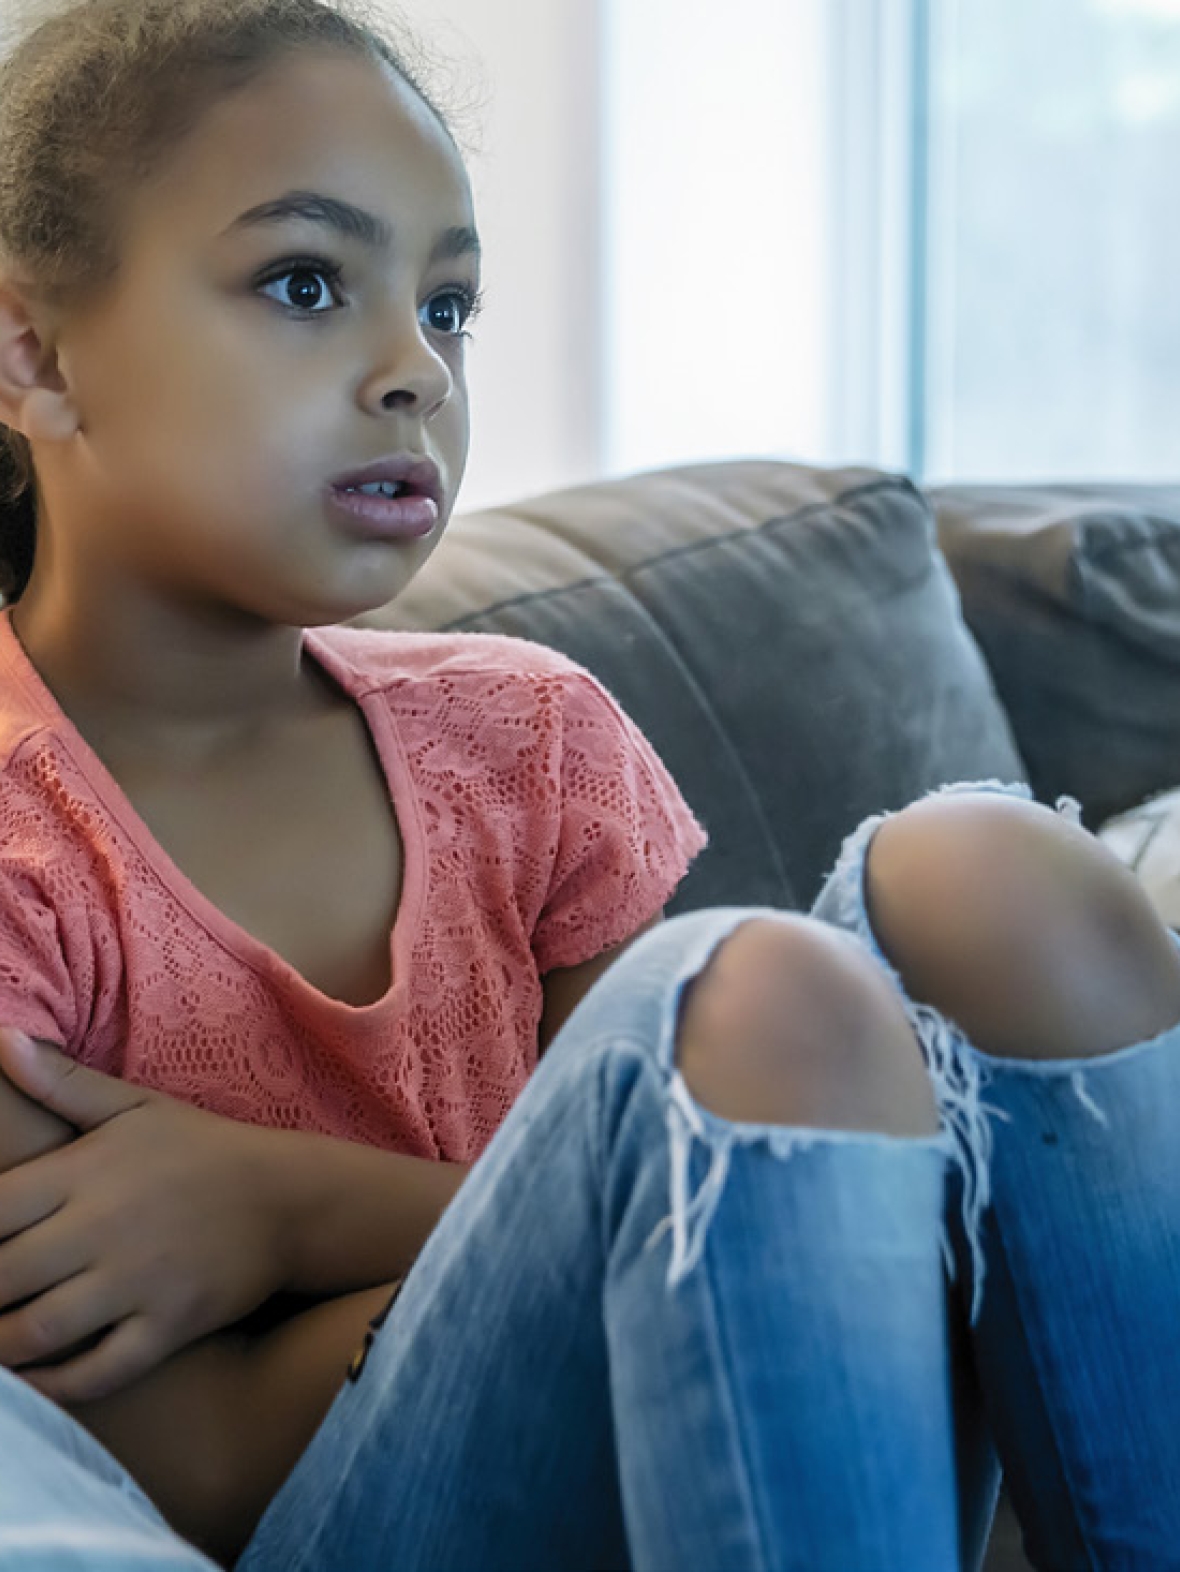 Urge media companies to stop running junk food ads during children’s programming